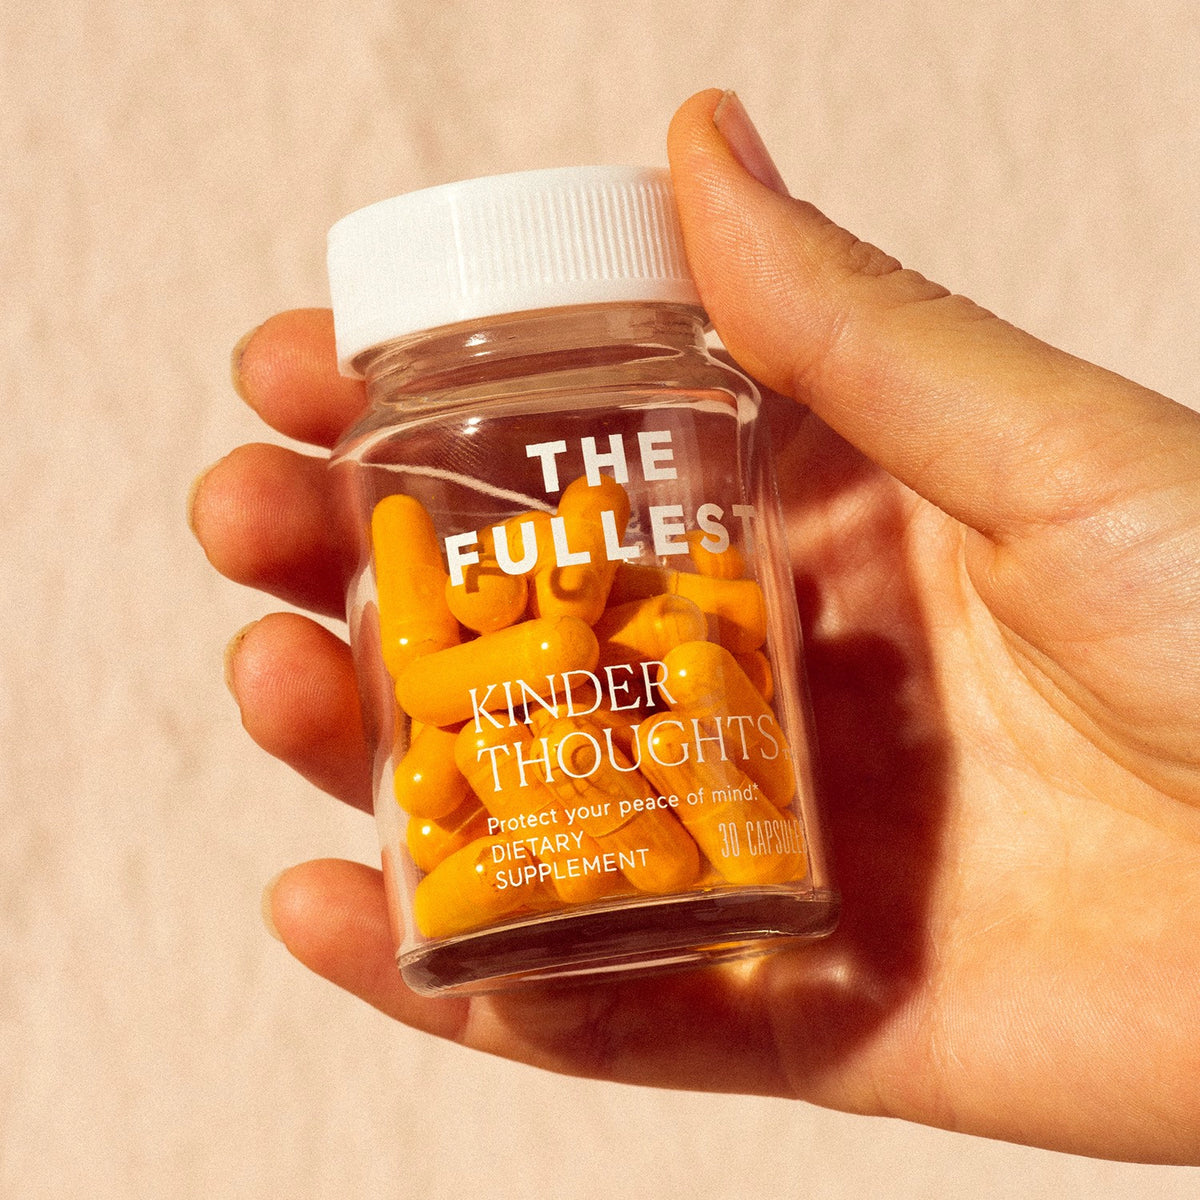 A hand holding a transparent bottle of Happy Habits Bundle supplements with the label &quot;THE FULLEST kinder thoughts&quot;.